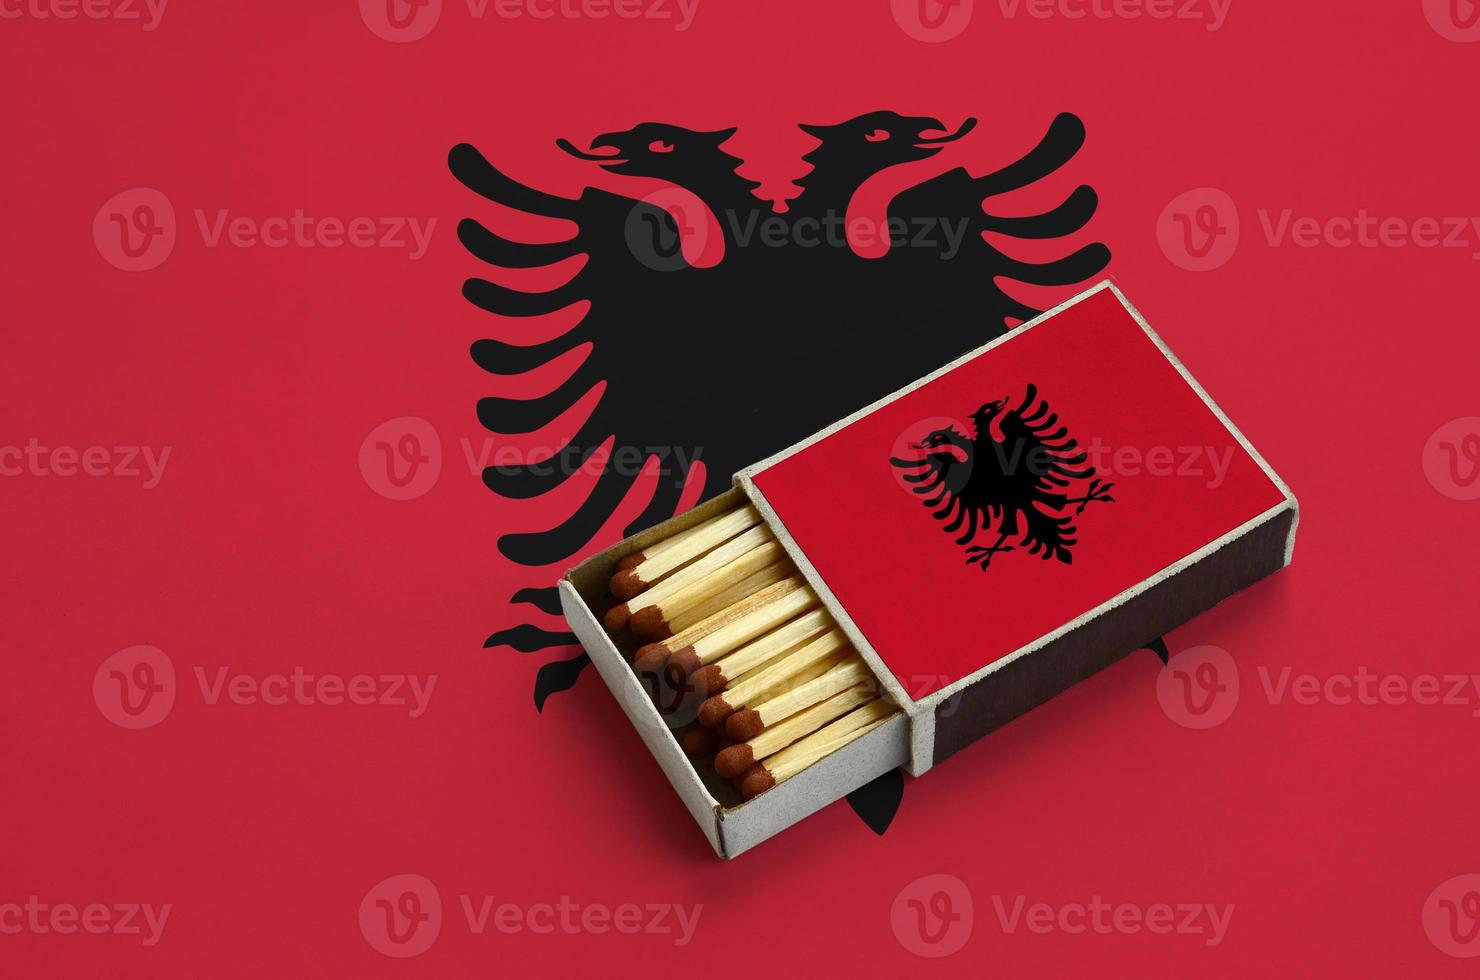 Albania flag is shown in an open matchbox, which is filled with matches and lies on a large flag photo